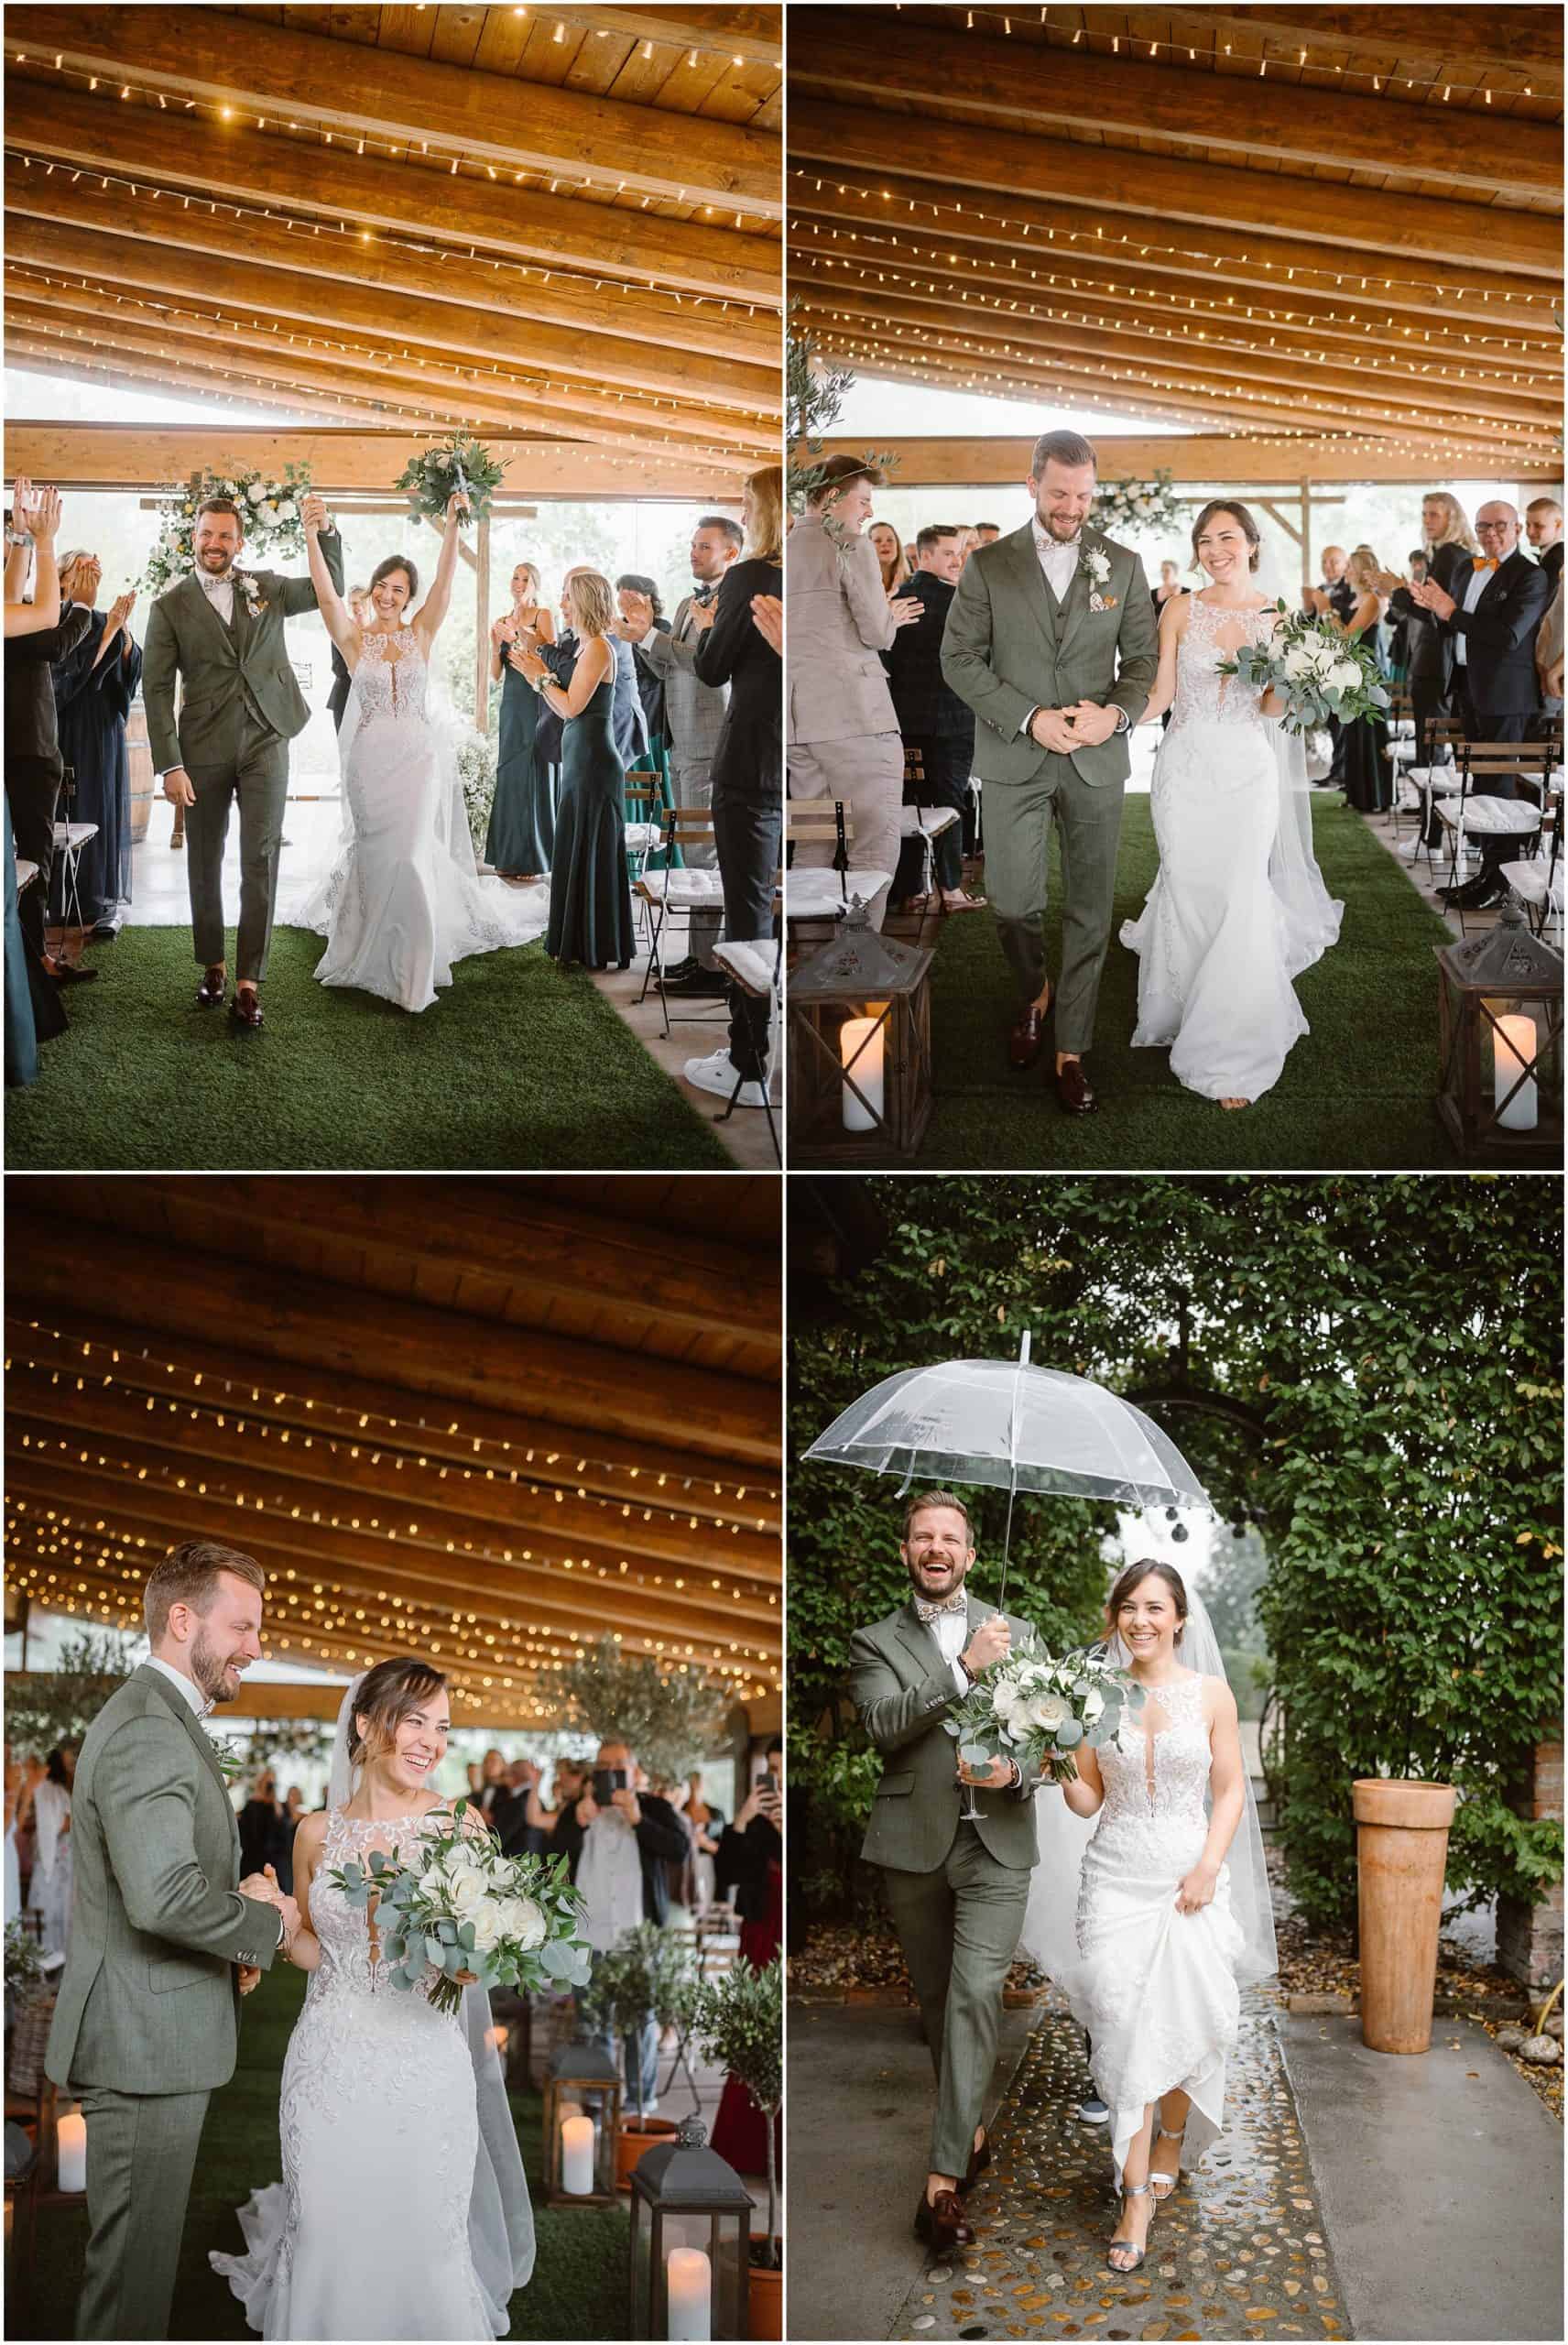 Bride and groom having fun under the rain on their wedding day in the Langhe region of Piedmont, Italy